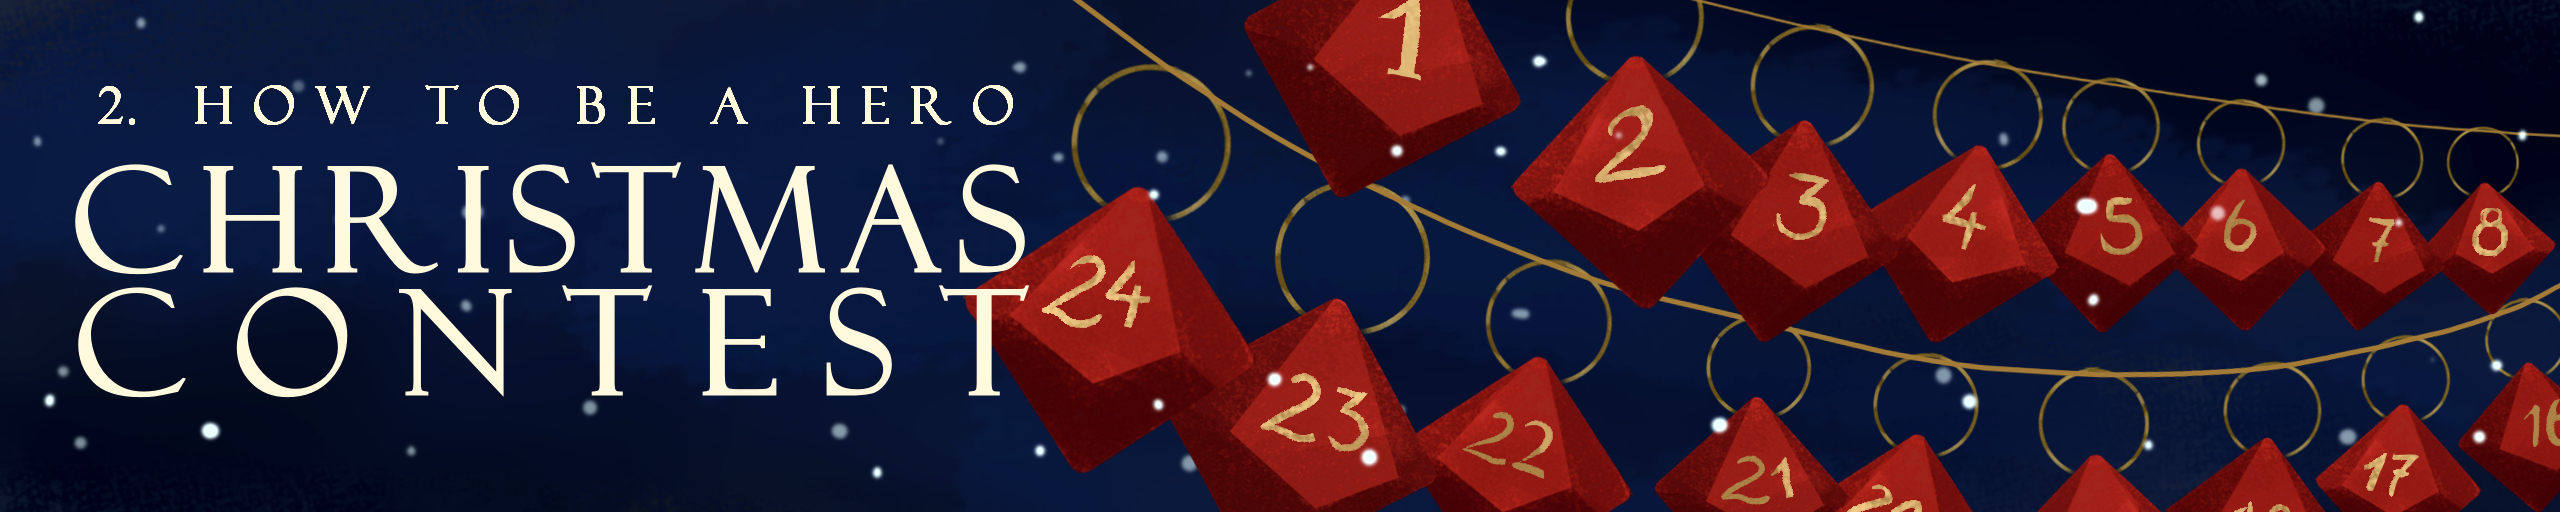 ChristmasContest Banner20.png